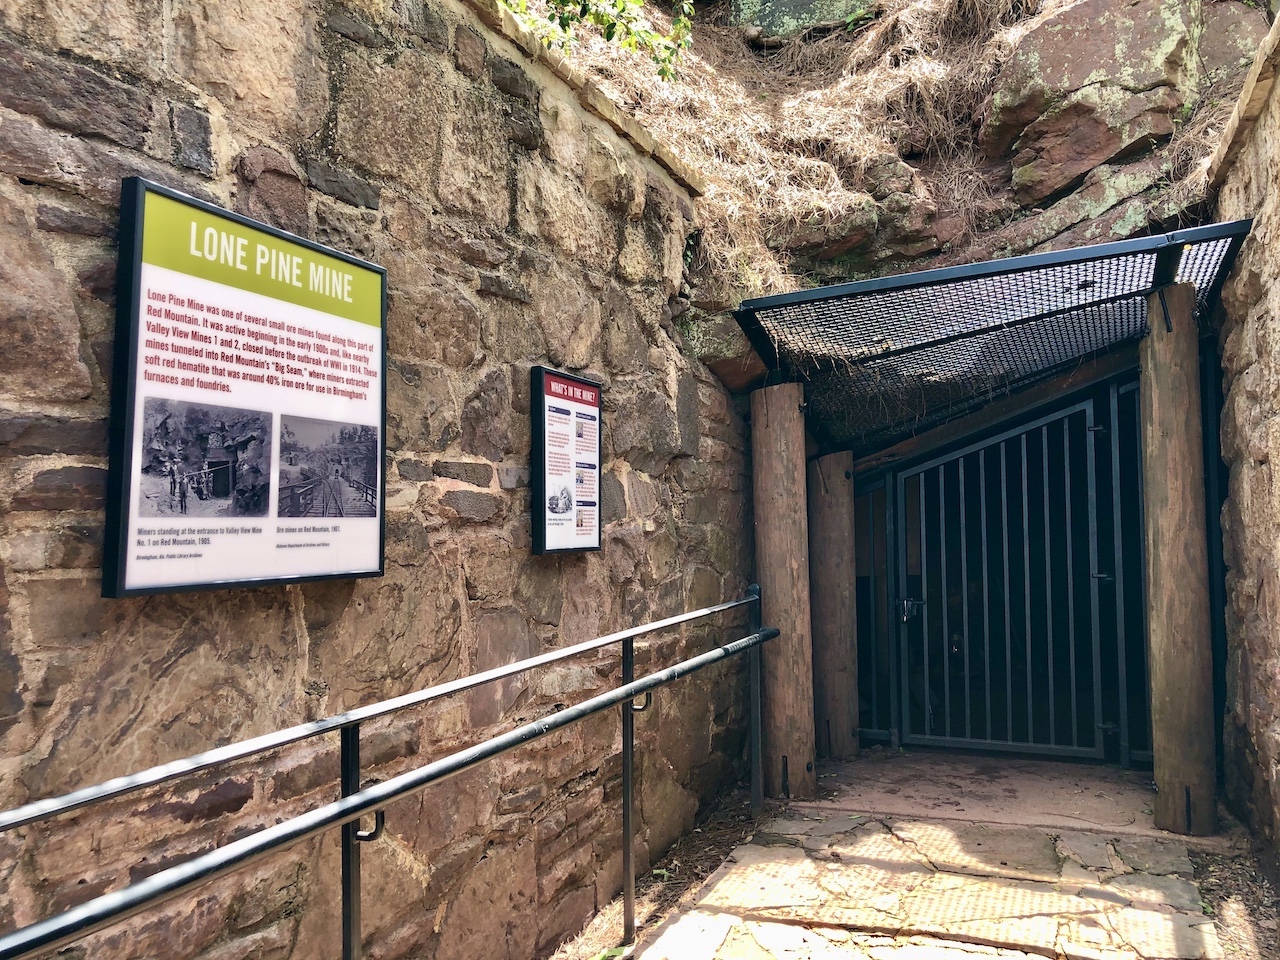 Walkway leading up to mine entrance showing left hand side of rock walls, now with signage with info about mine. Right portion shows black iron gate installed at entrance to mine. 